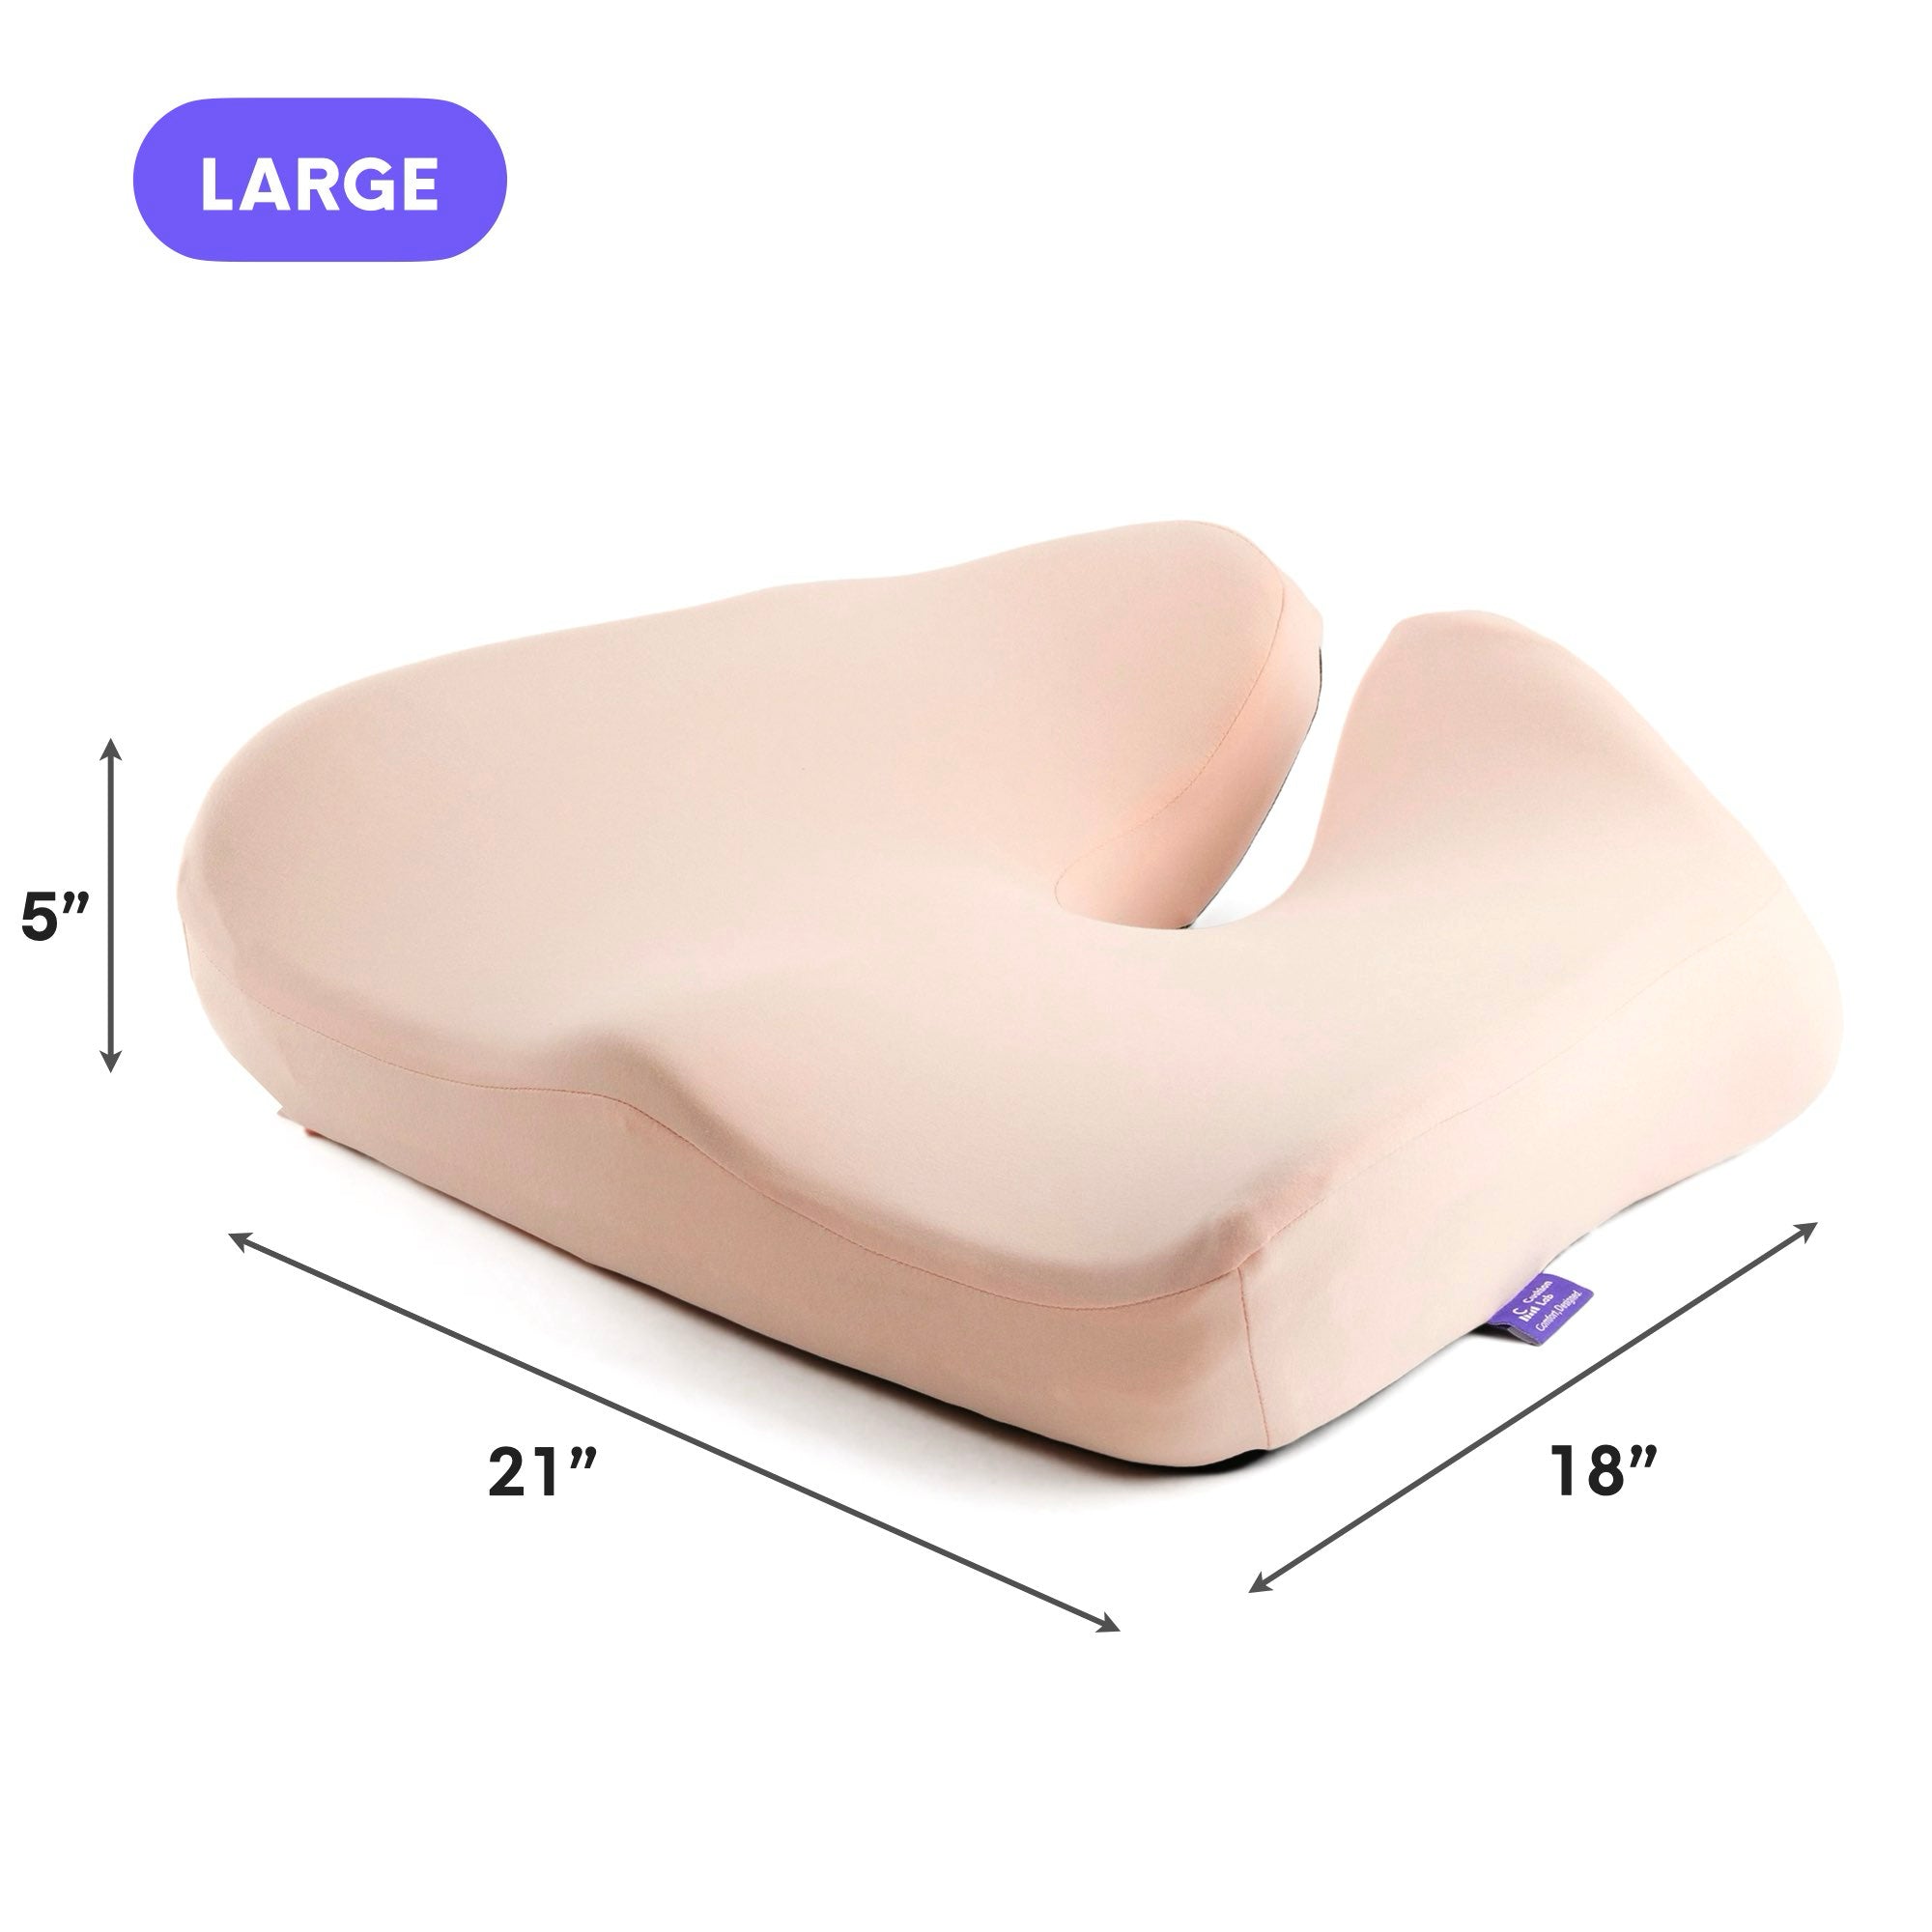 Cushion Lab Patented Pressure Relief Seat Cushion for Long Sitting Hours